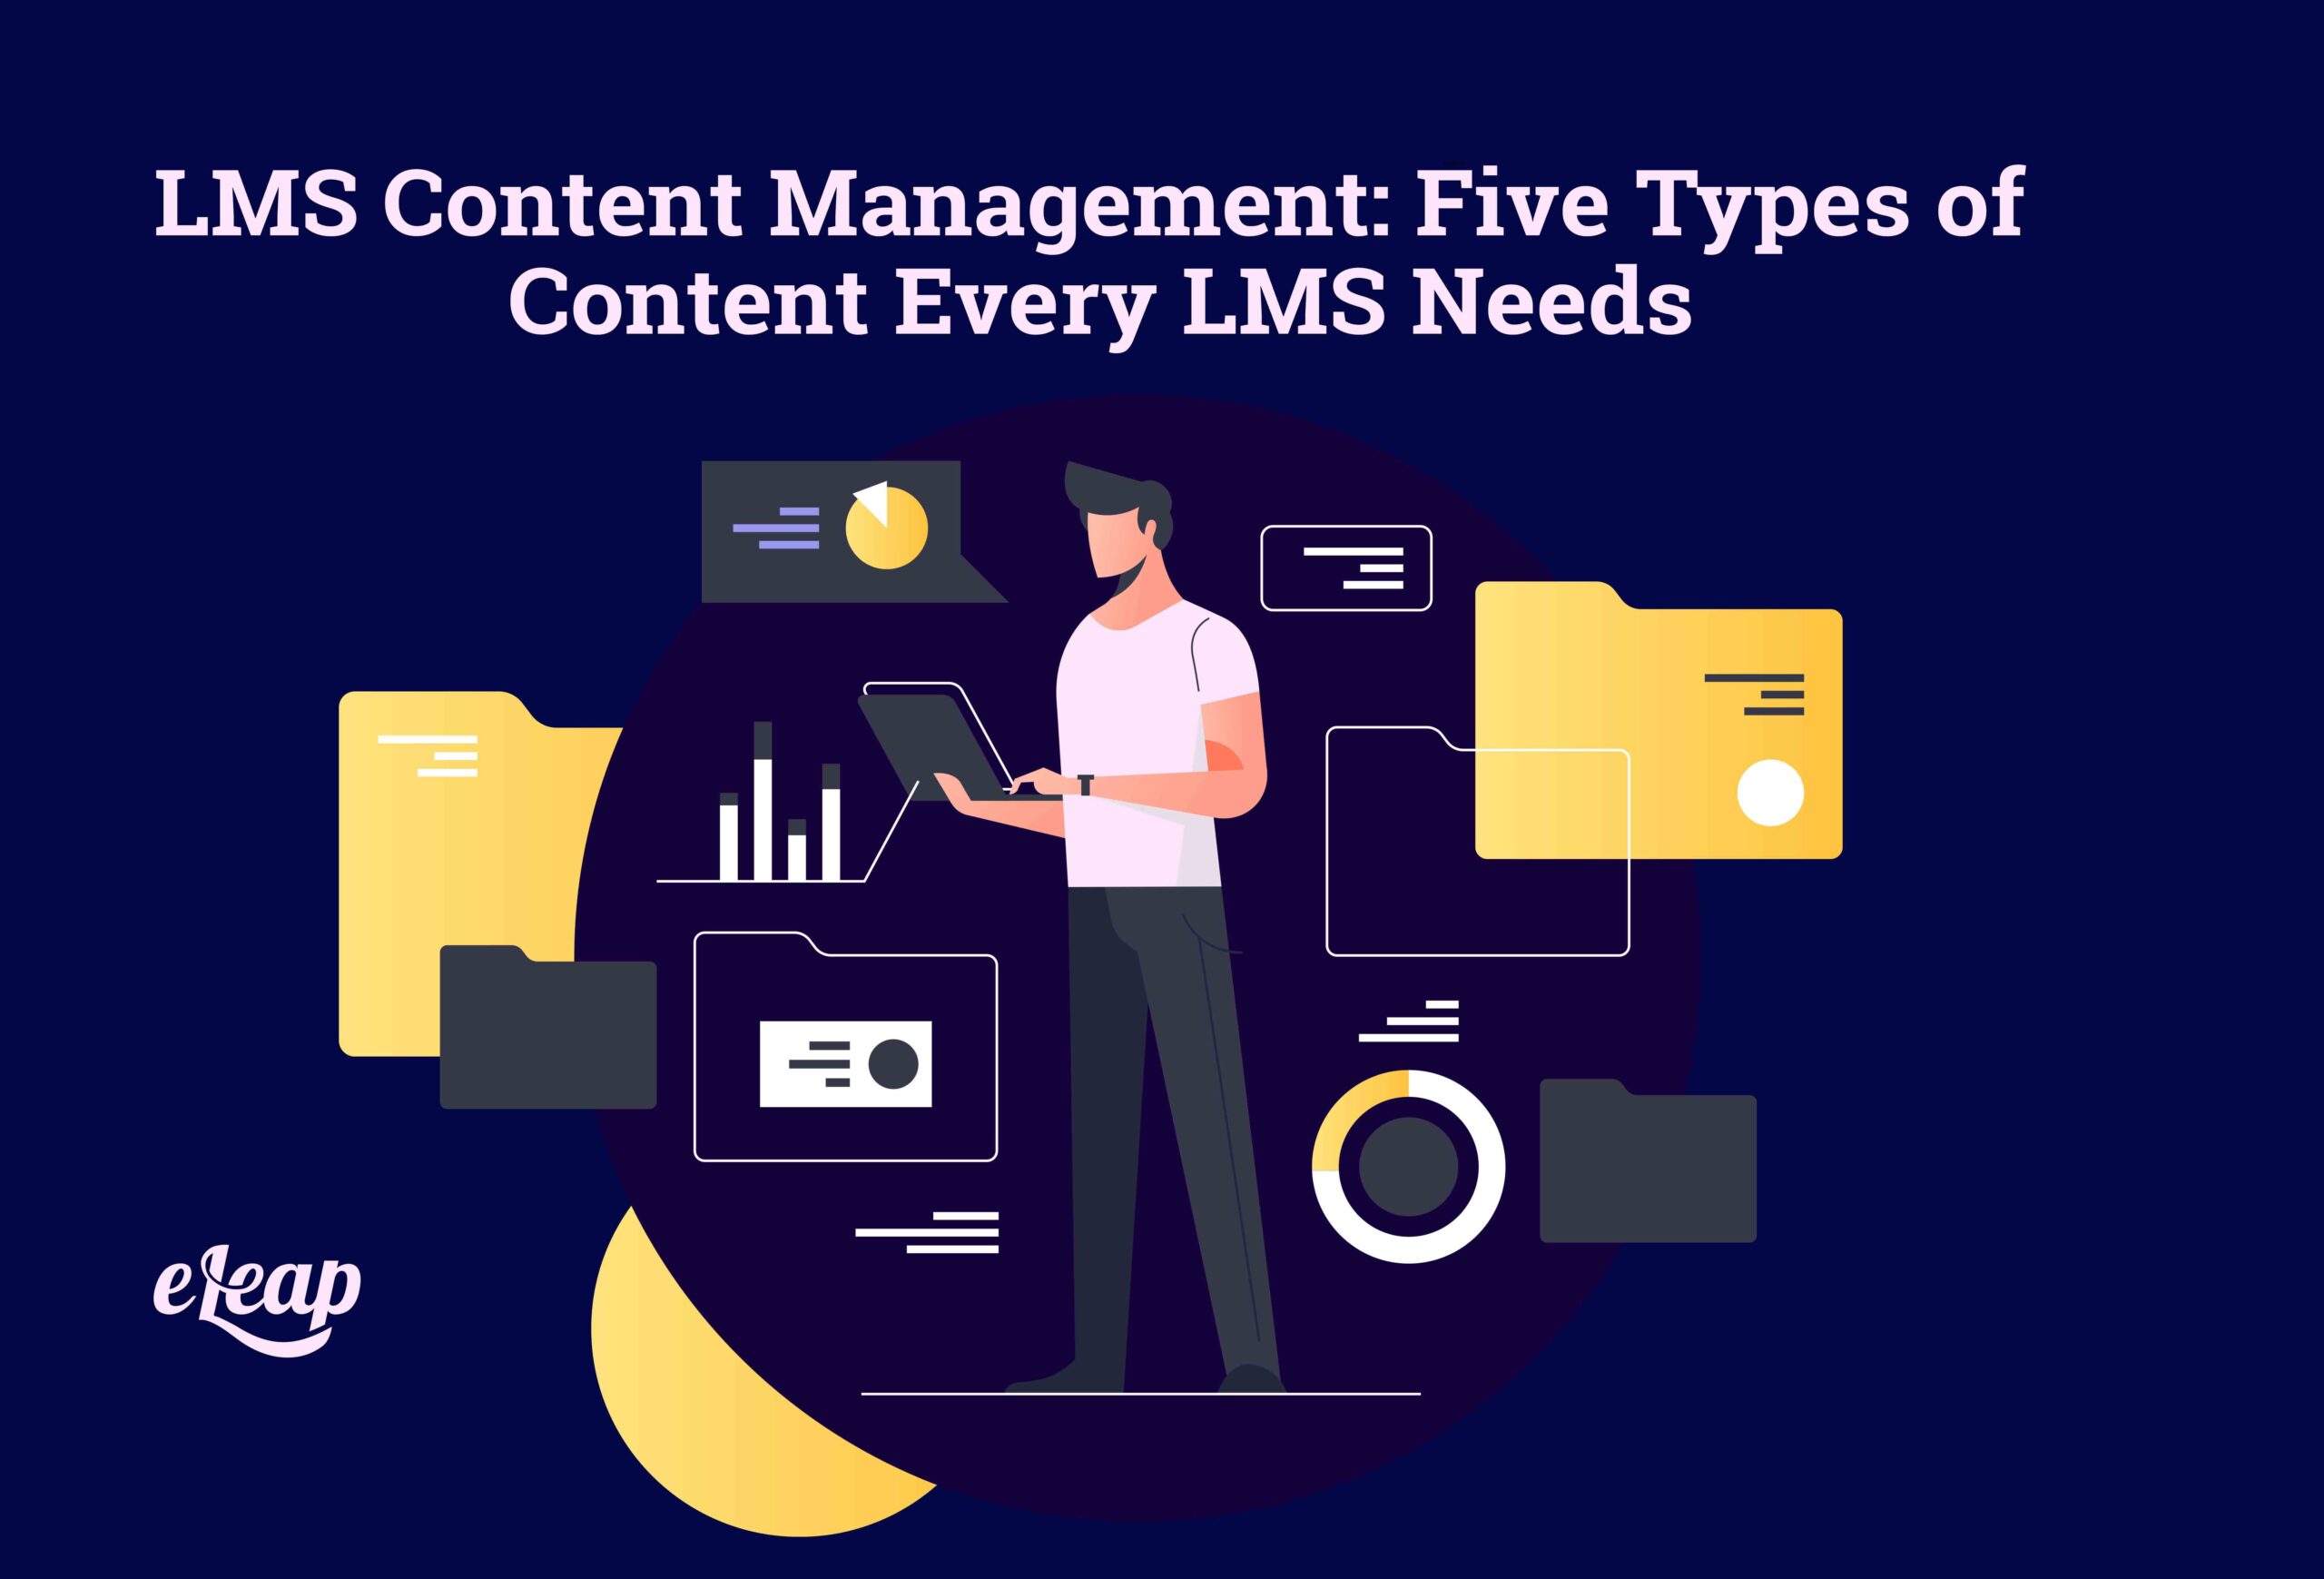 LMS Content Management: Five Types of Content Every LMS Needs